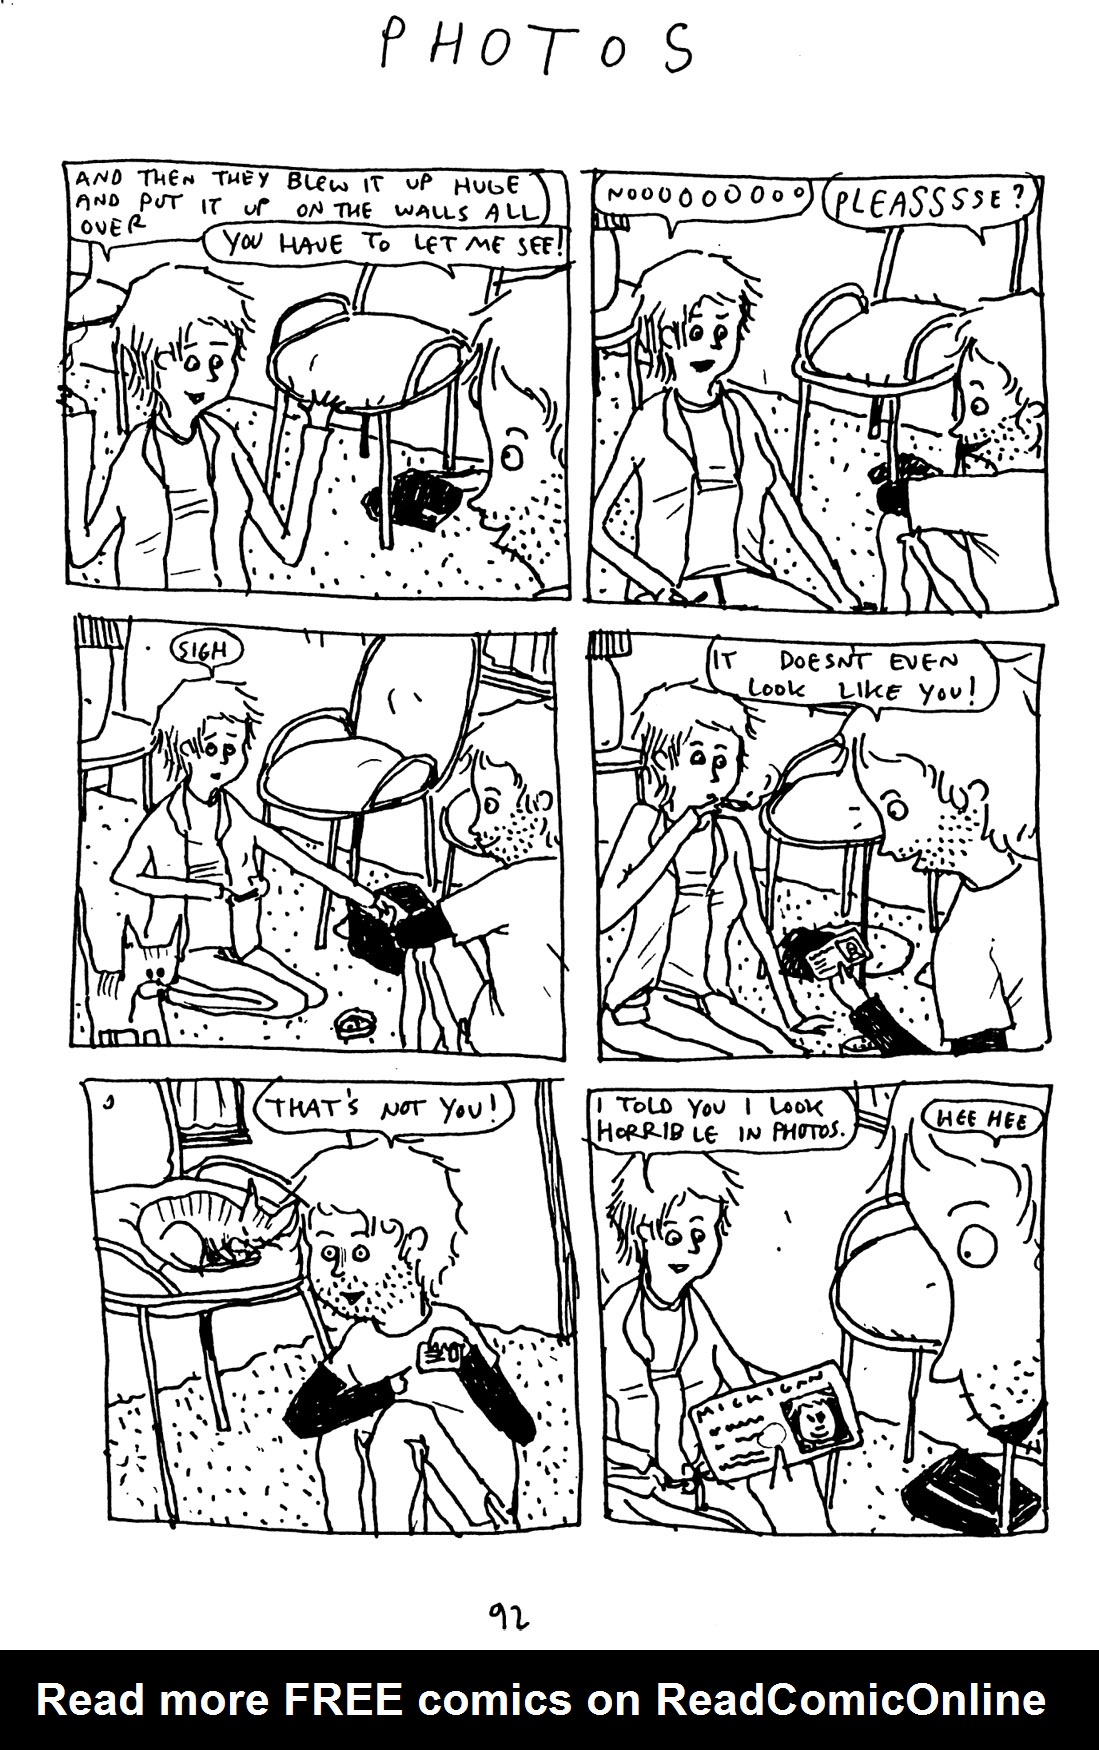 Read online Unlikely comic -  Issue # TPB (Part 2) - 4